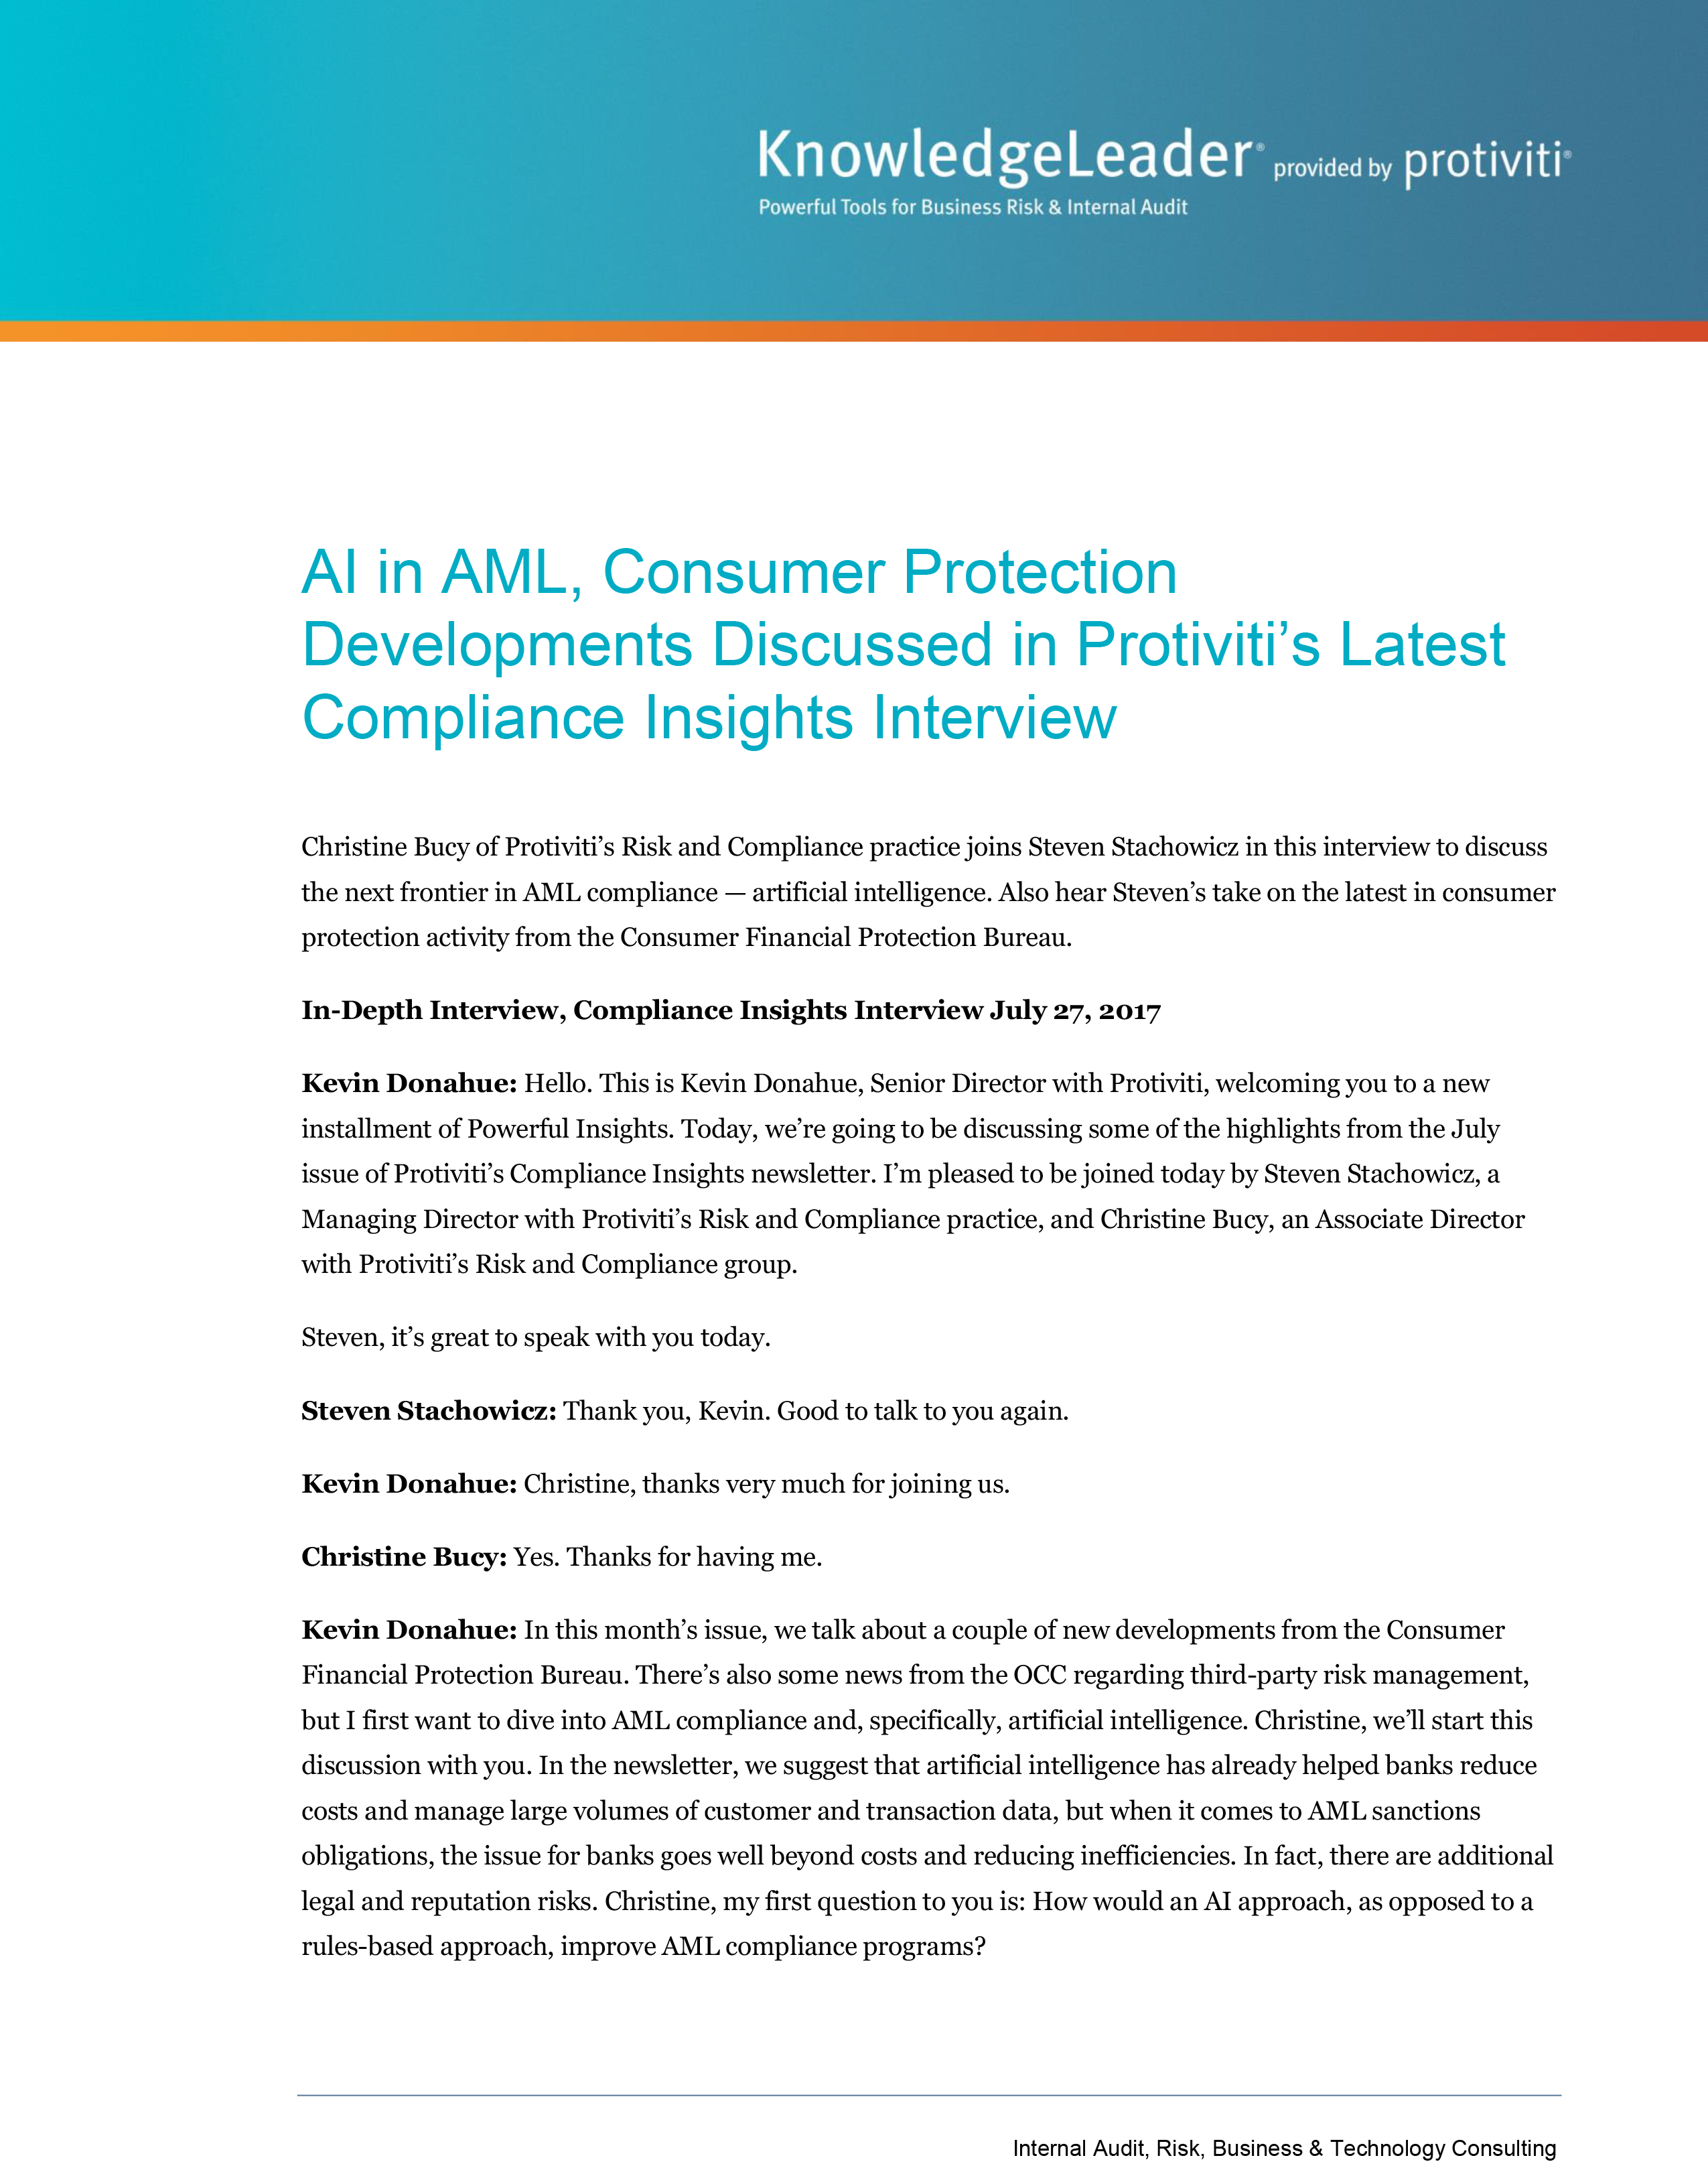 Screenshot of the first page of AI in AML, Consumer Protection Developments Interview